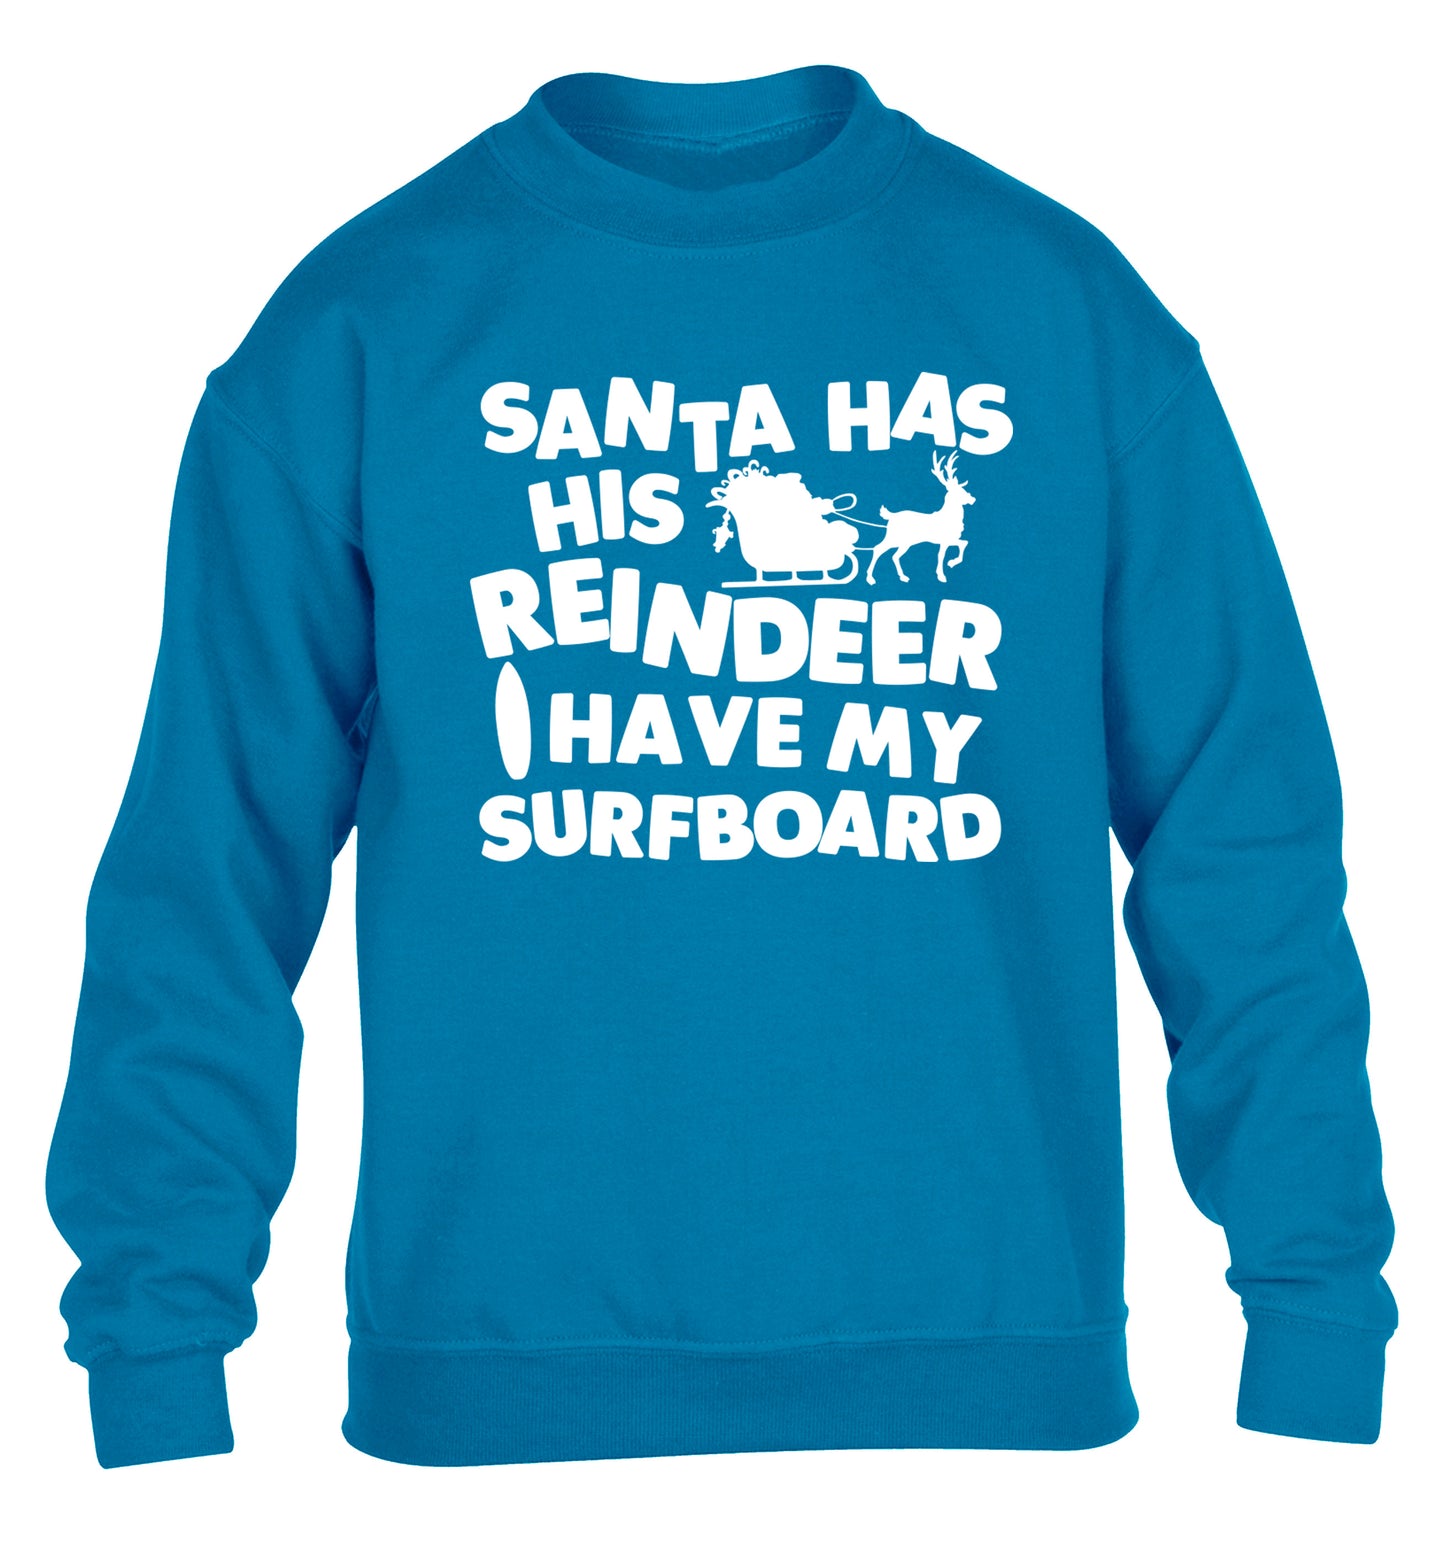 Santa has his reindeer I have my surfboard children's blue sweater 12-14 Years